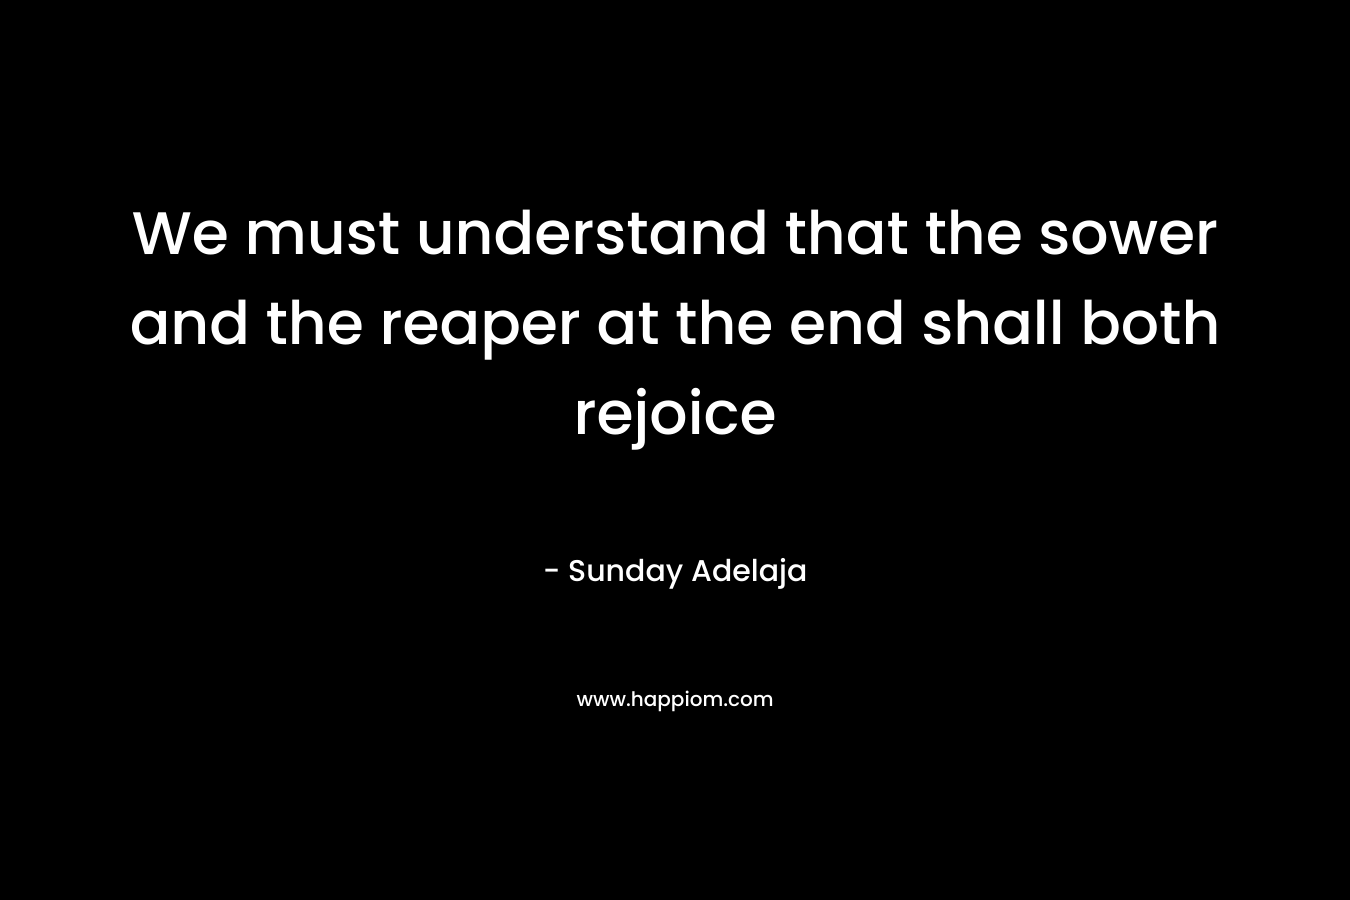 We must understand that the sower and the reaper at the end shall both rejoice